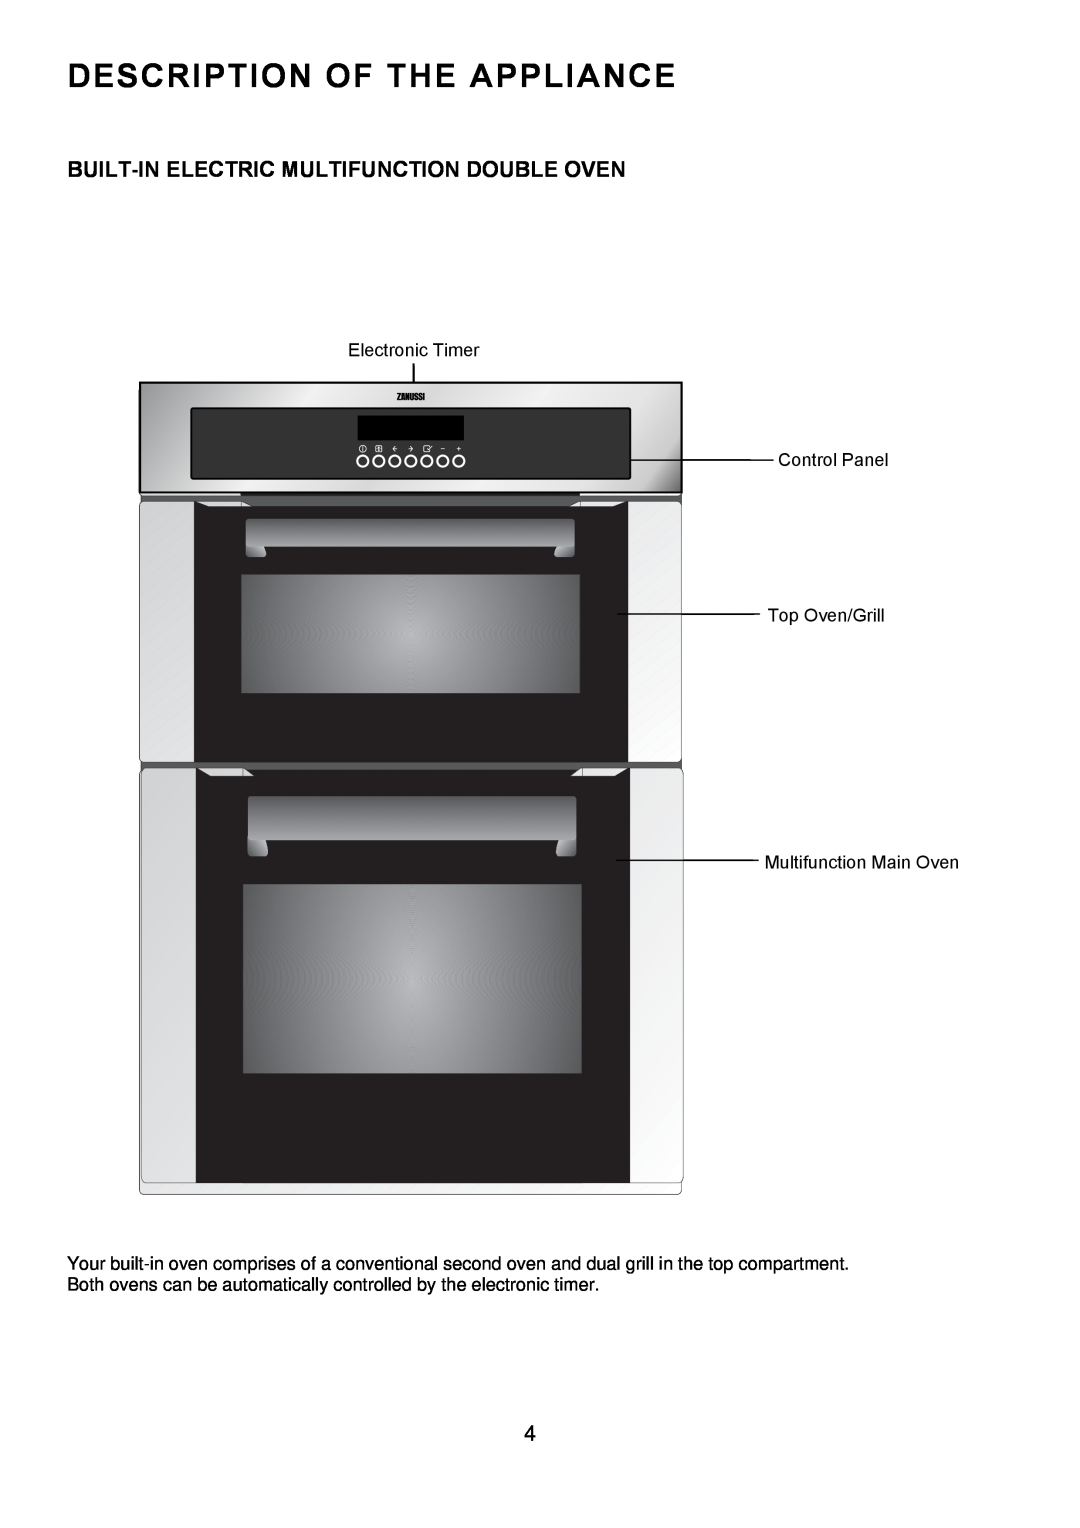 Zanussi ZOD 685 Description Of The Appliance, Built-In Electric Multifunction Double Oven, Electronic Timer, Control Panel 